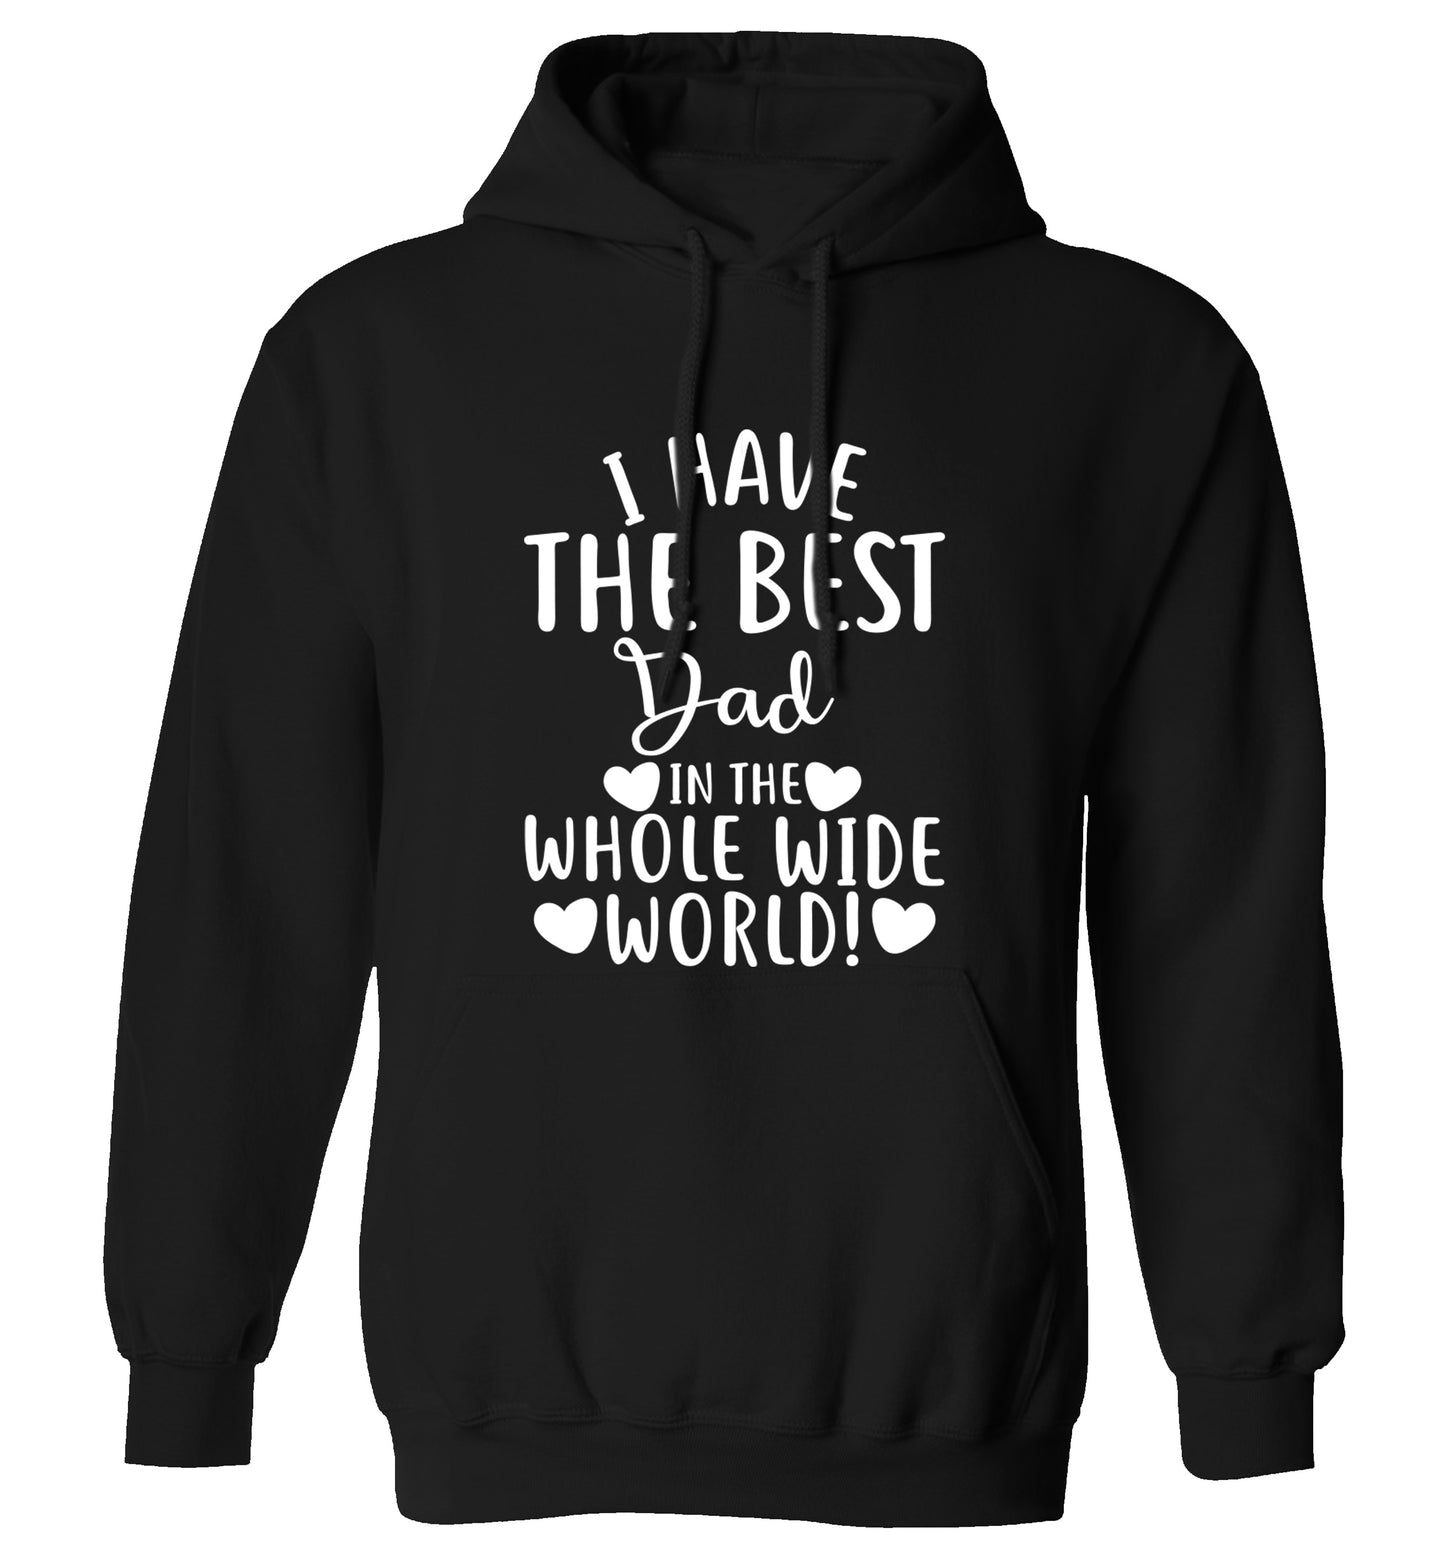 I have the best dad in the whole wide world! adults unisex black hoodie 2XL